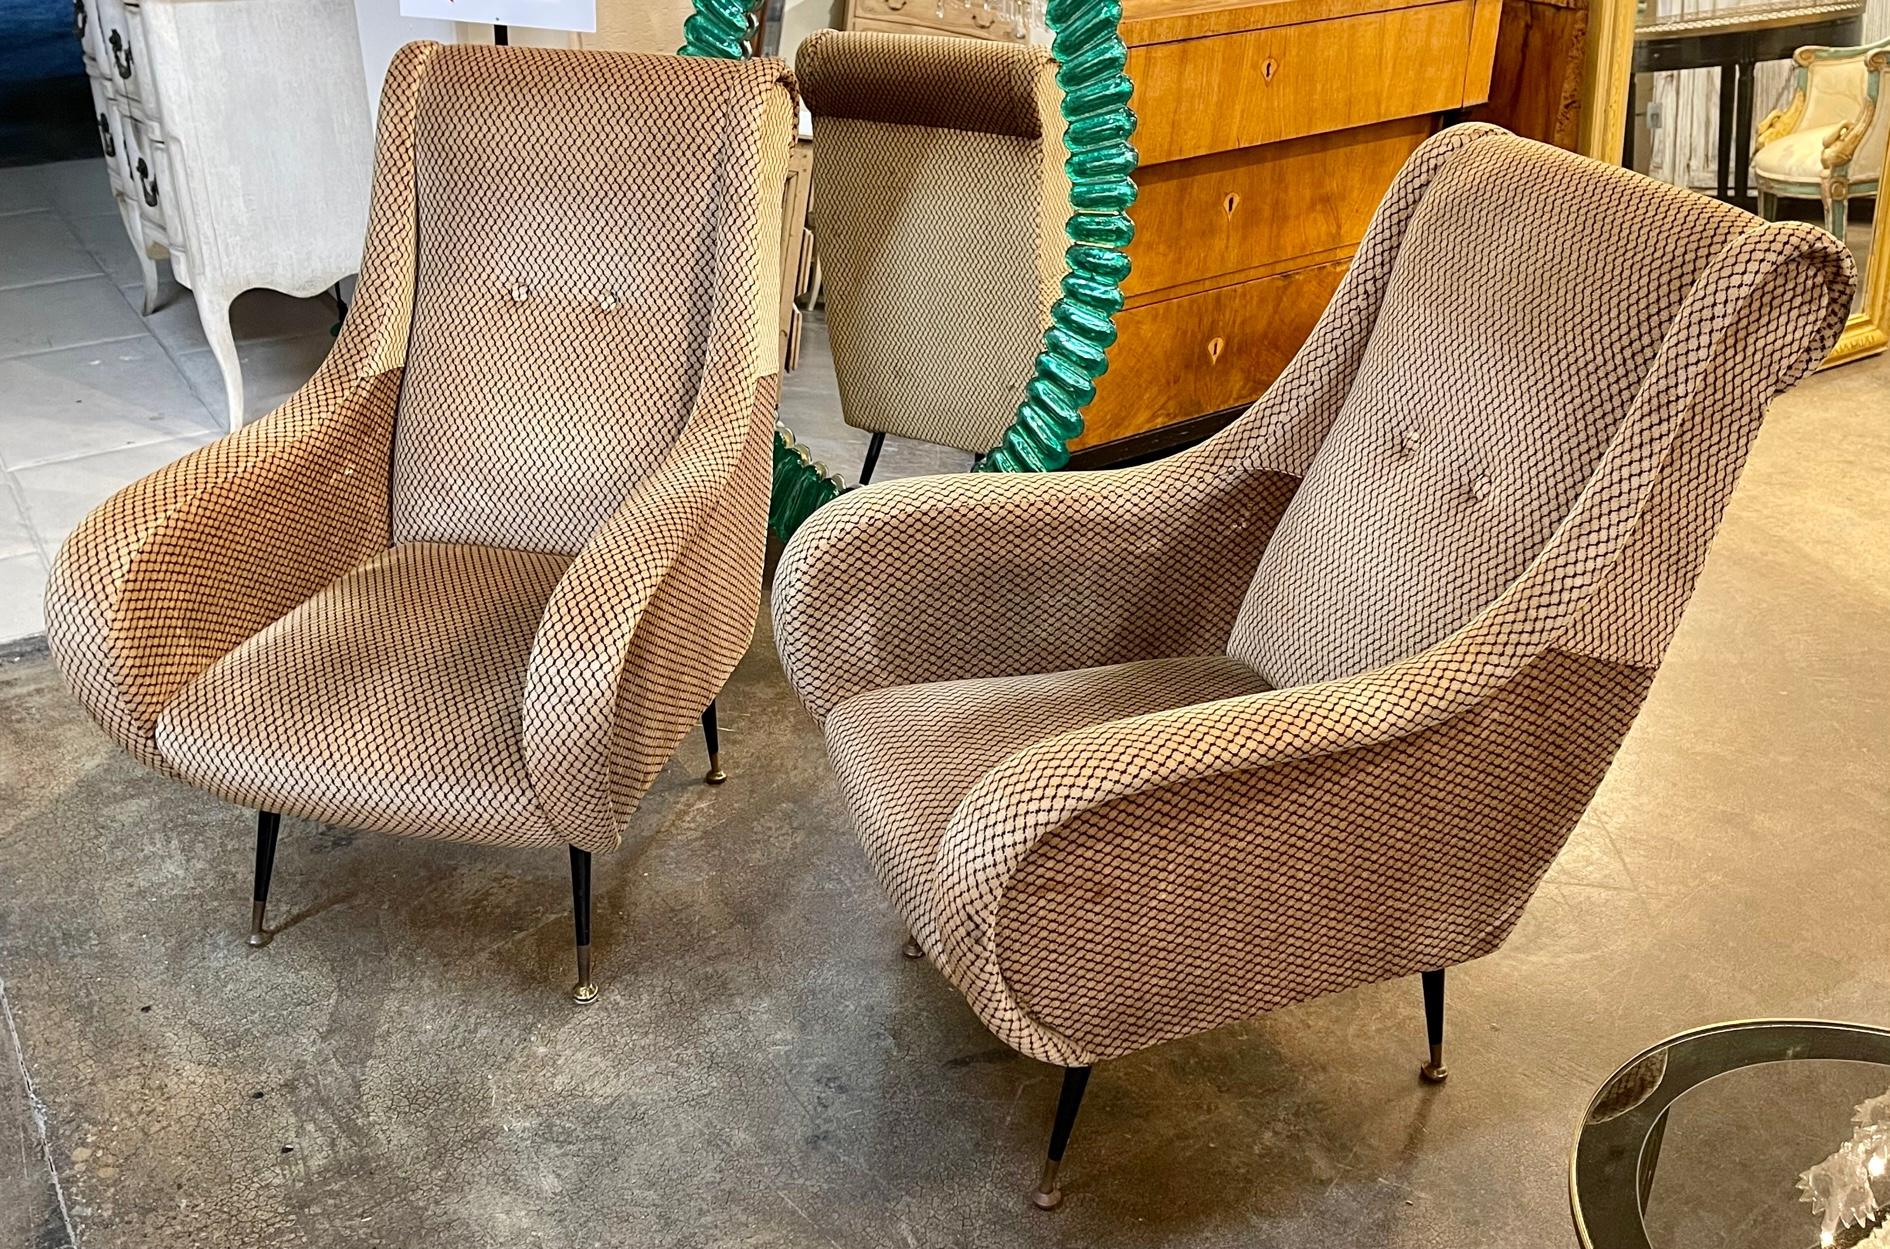 Pair of Italian MCM armchairs in the style of Marco Zanuso. Circa 1940. Perfect for today's transitional designs.